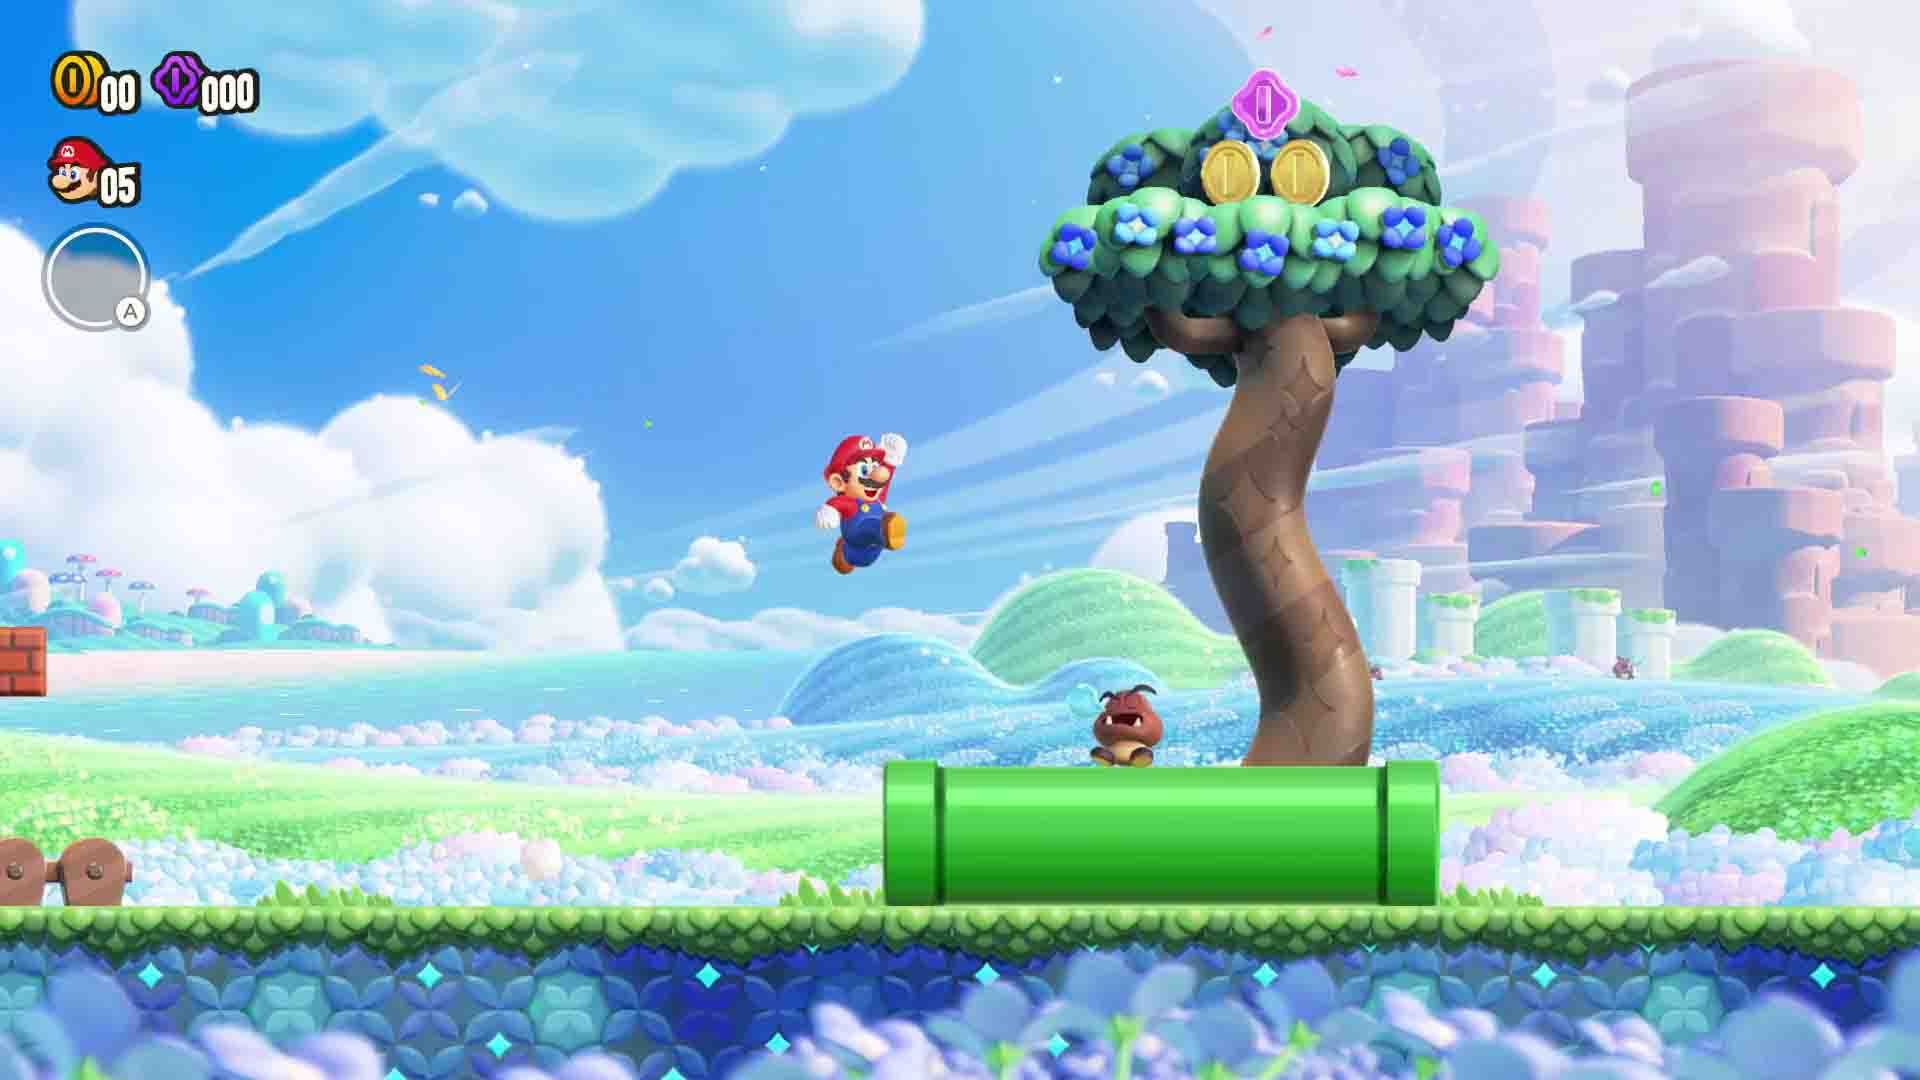 New Super Mario Bros. Wii speedruns are incredibly difficult 